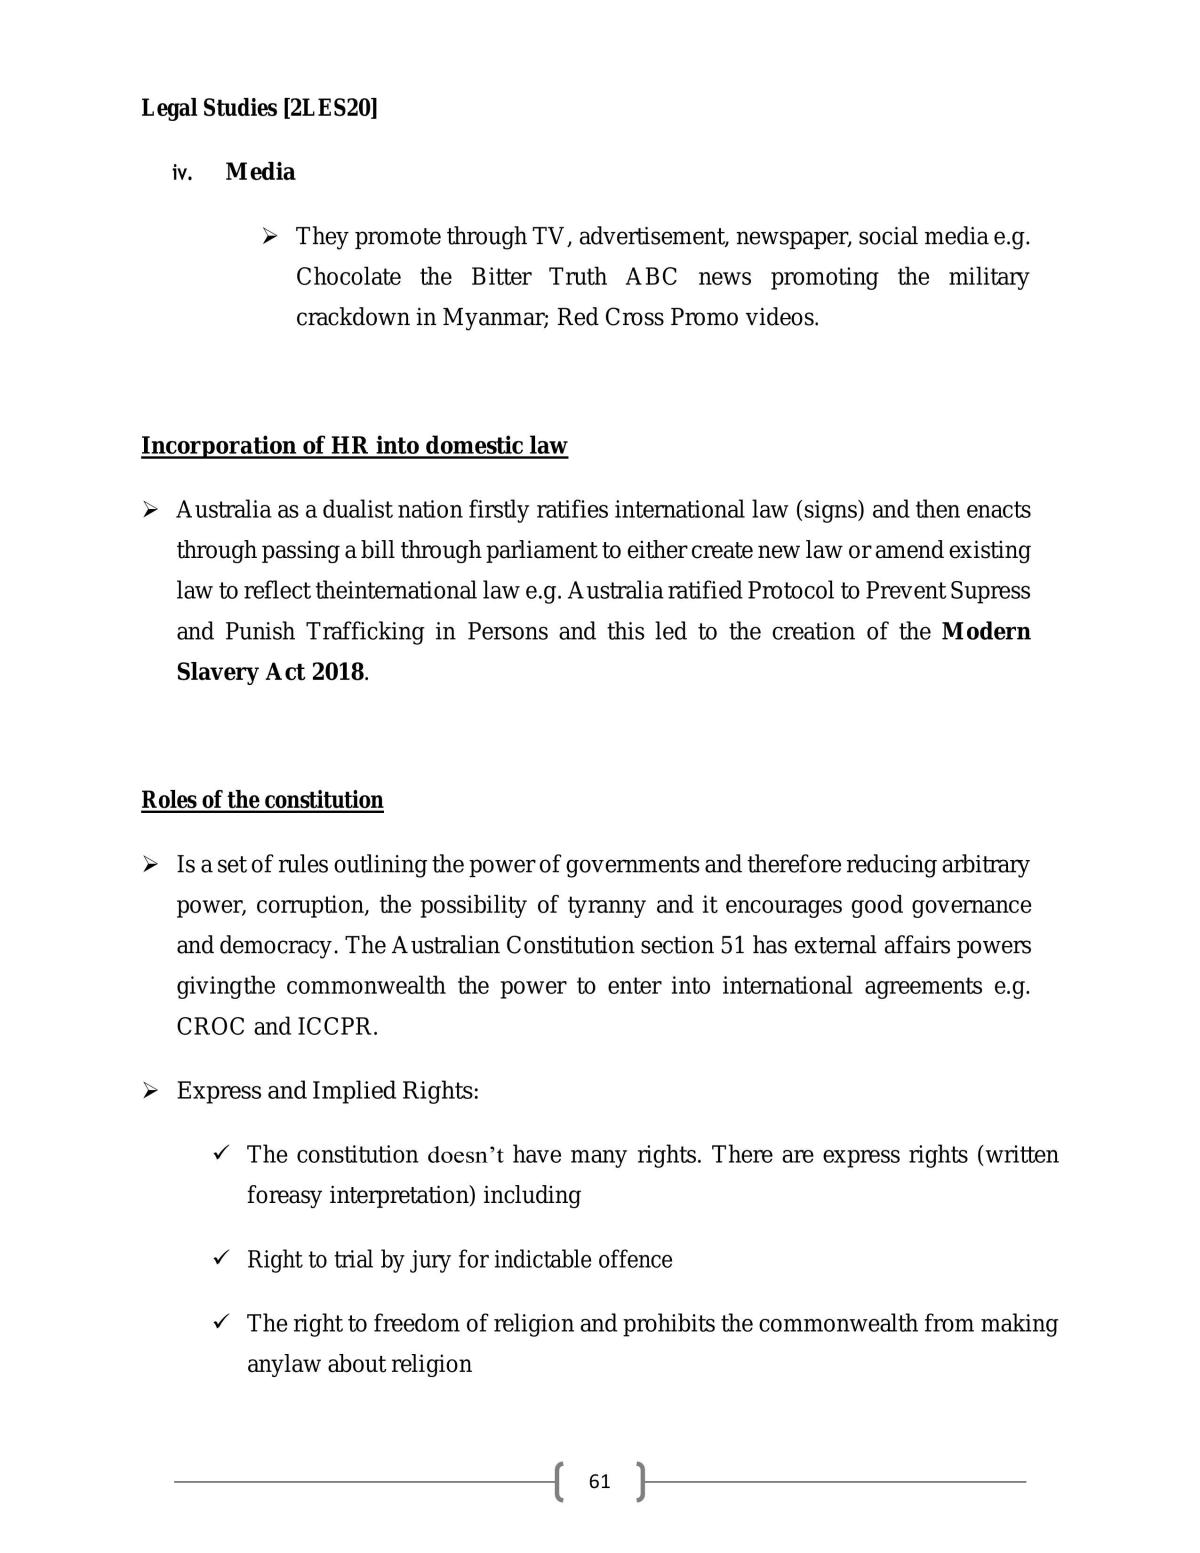 Legal Studies Complete Notes  - Page 61